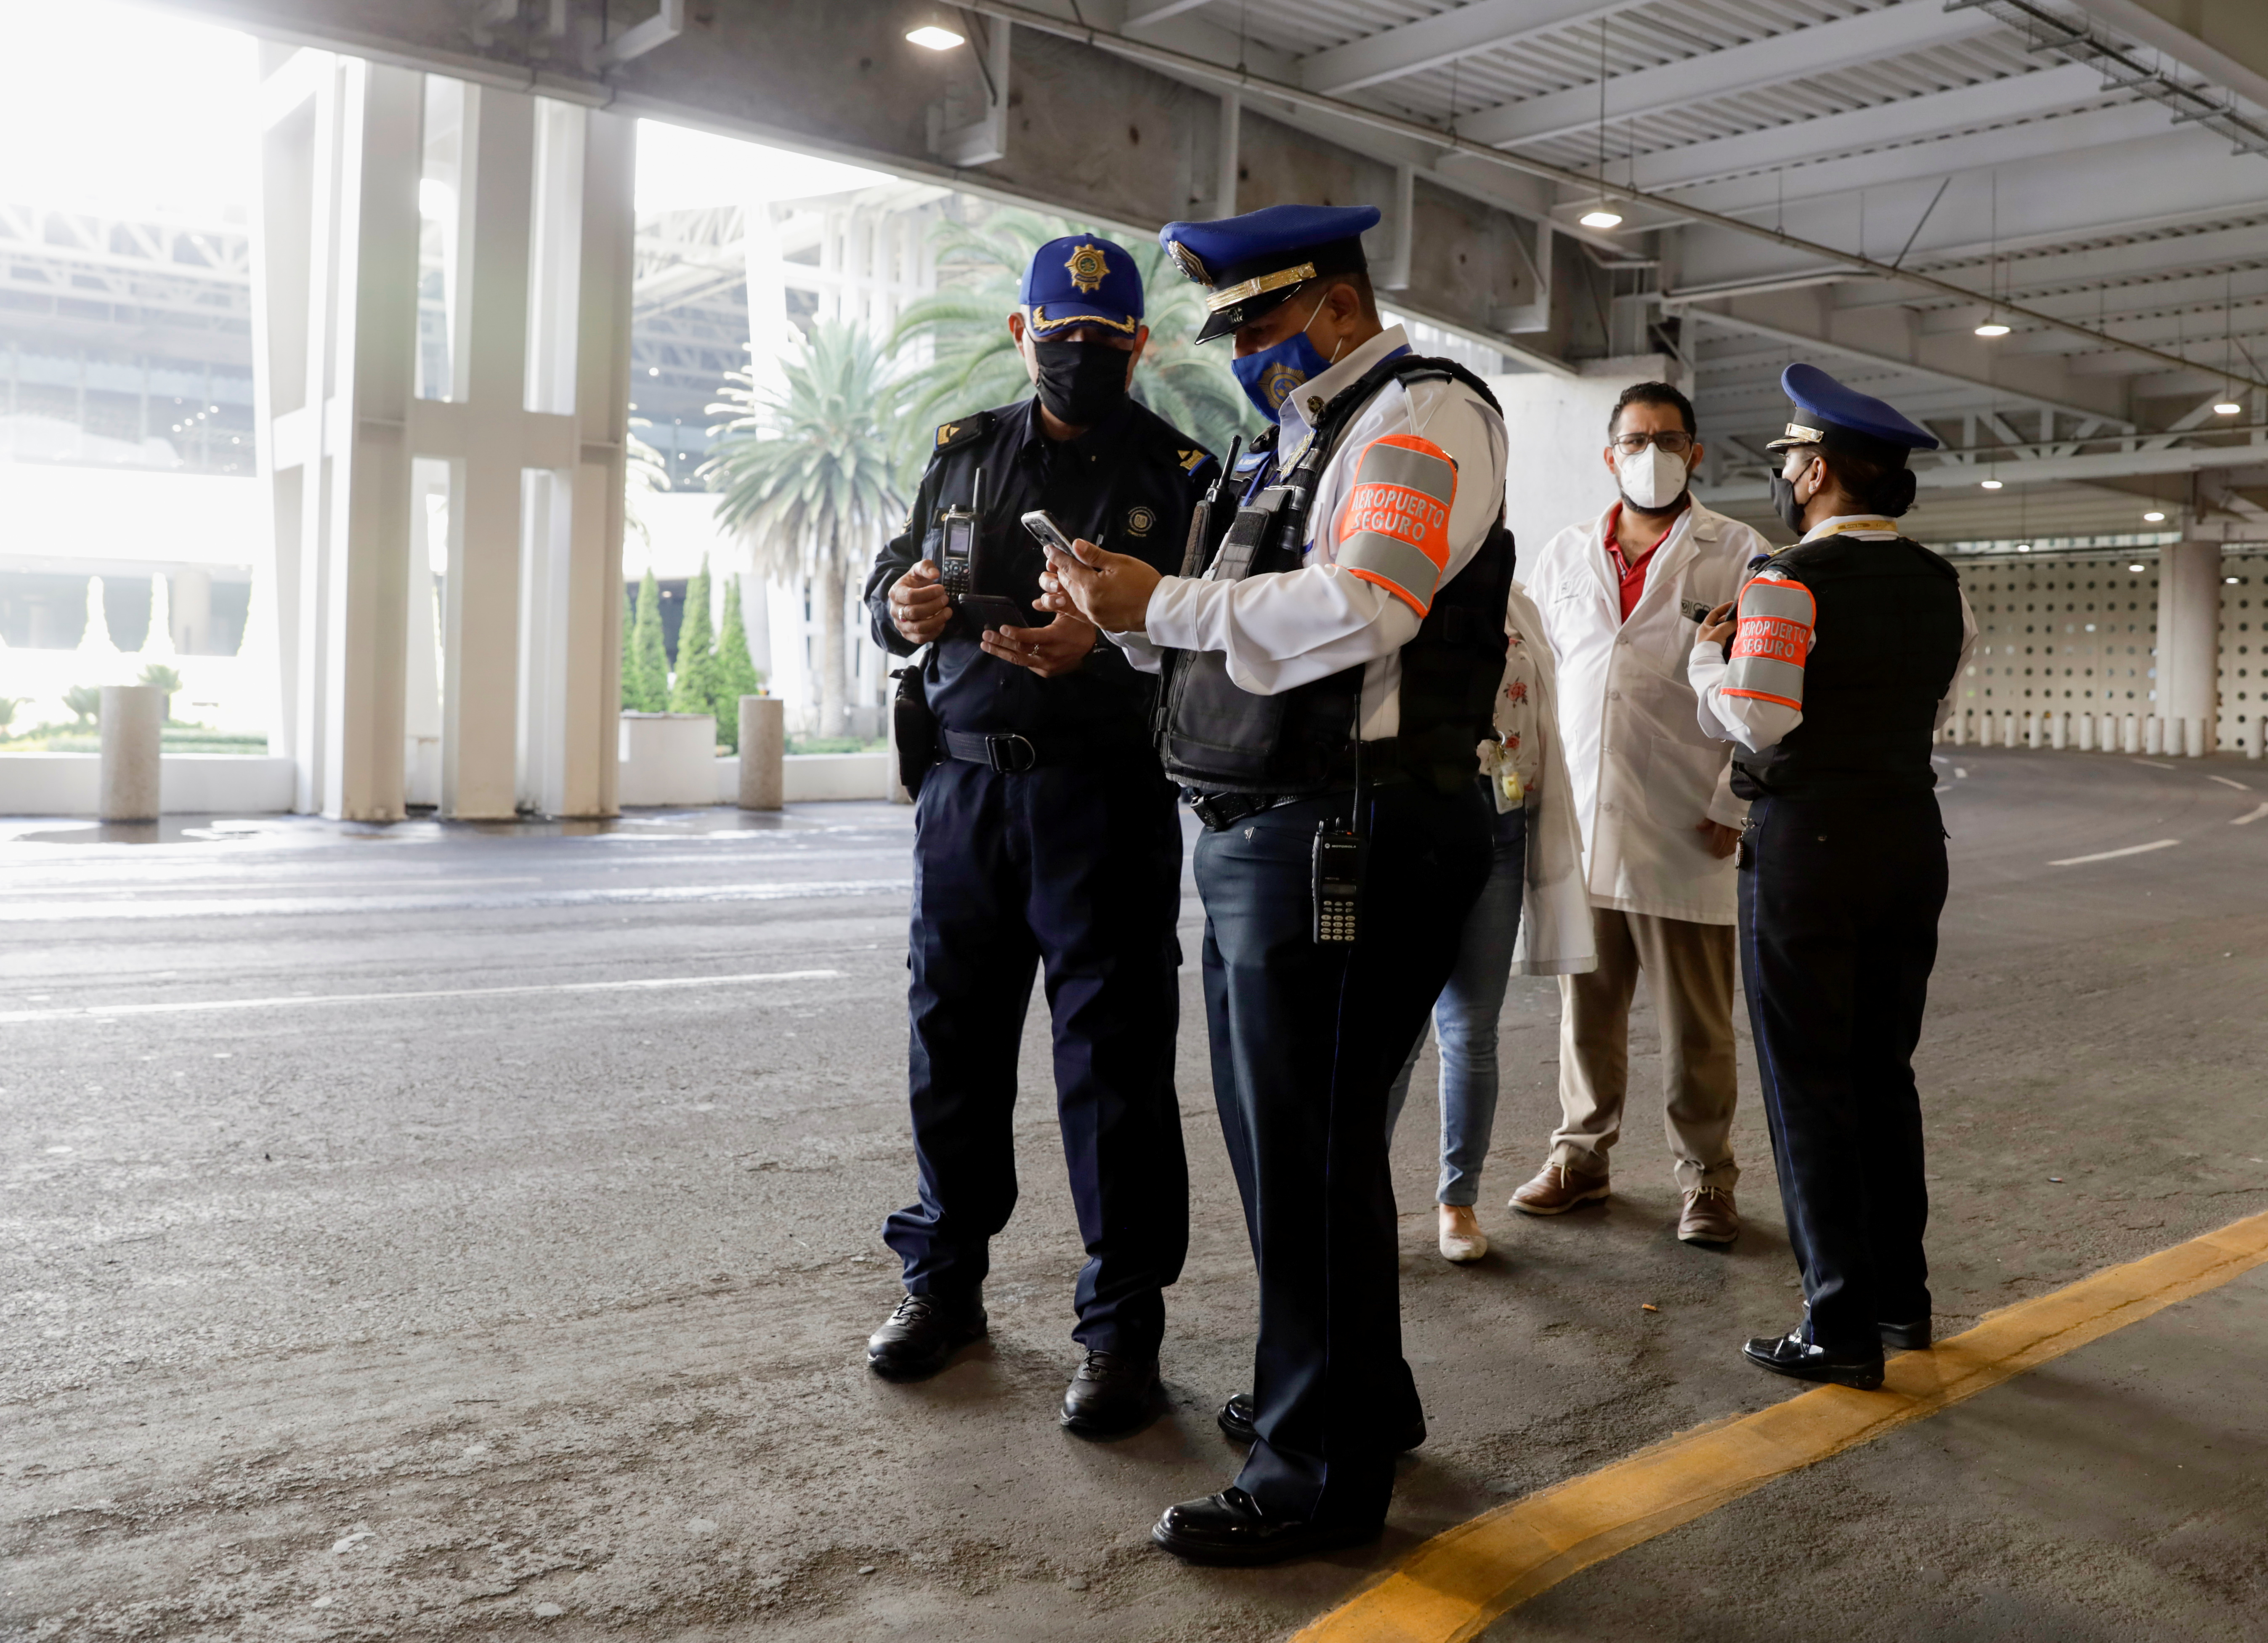 Agents of the city's prosecutors office and police officer collect information outside the airport, in Mexico City